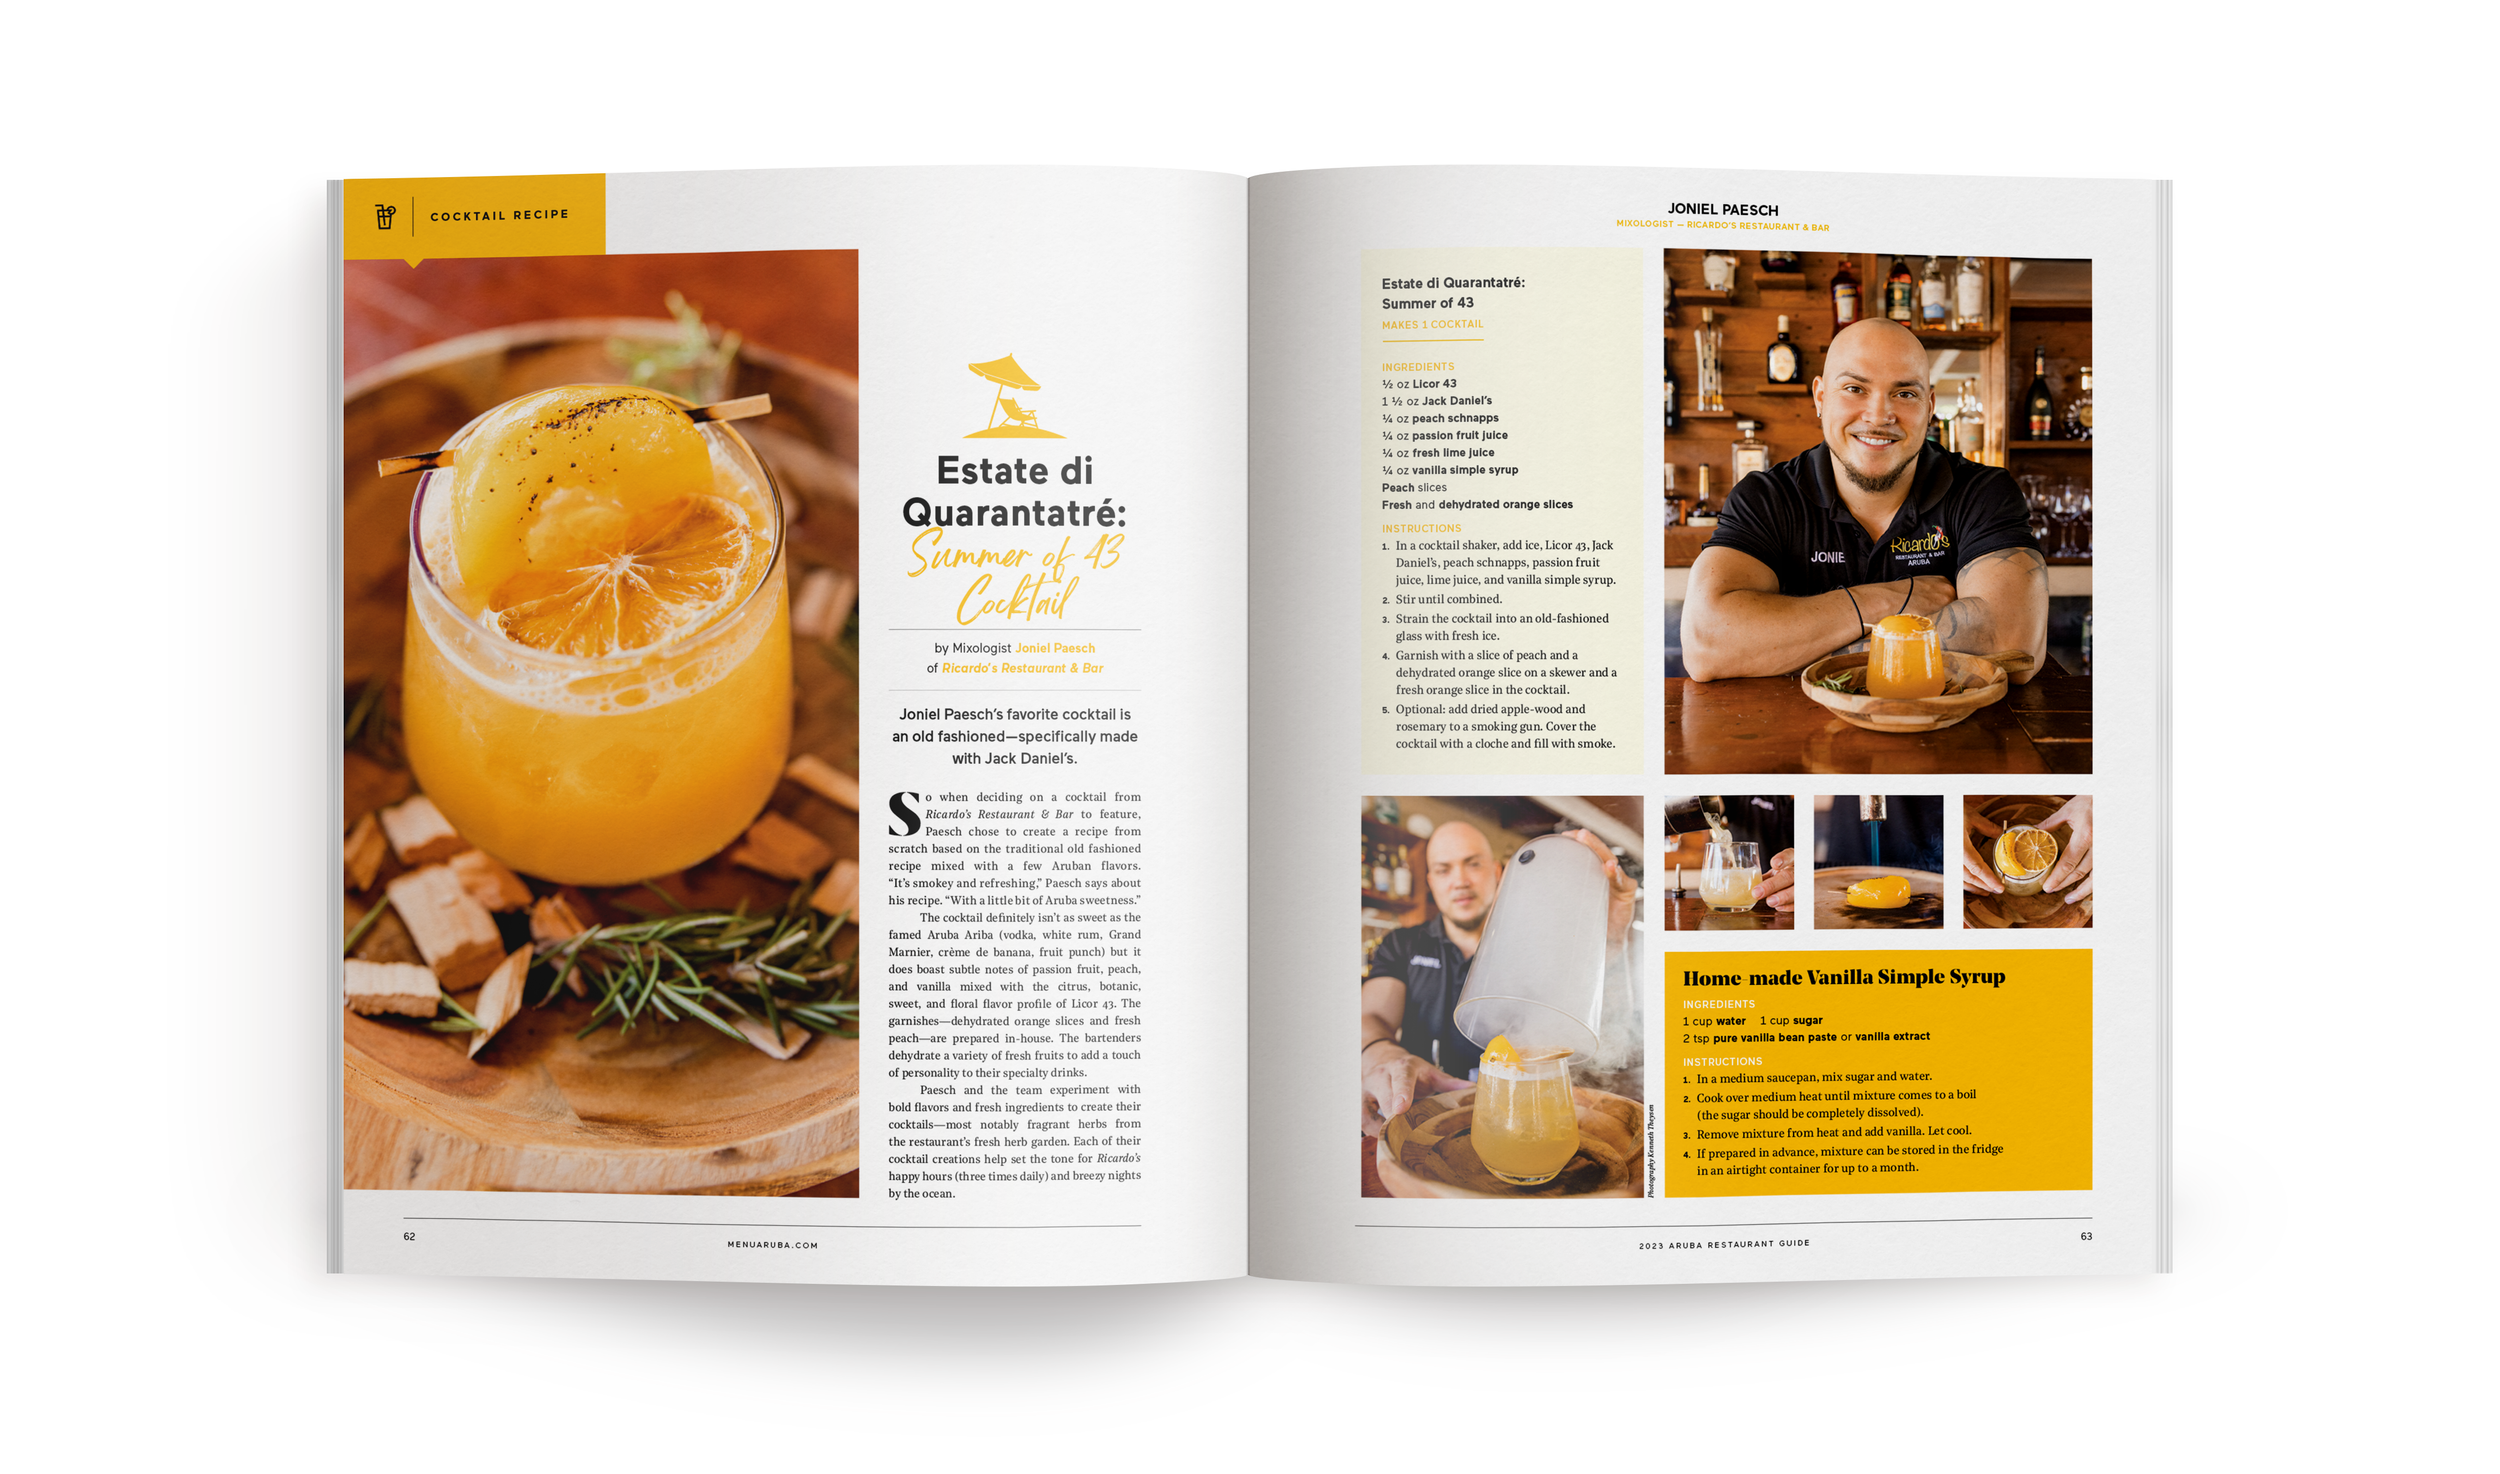 Magazine Open - Magazine Page - Cocktail Recipe.png